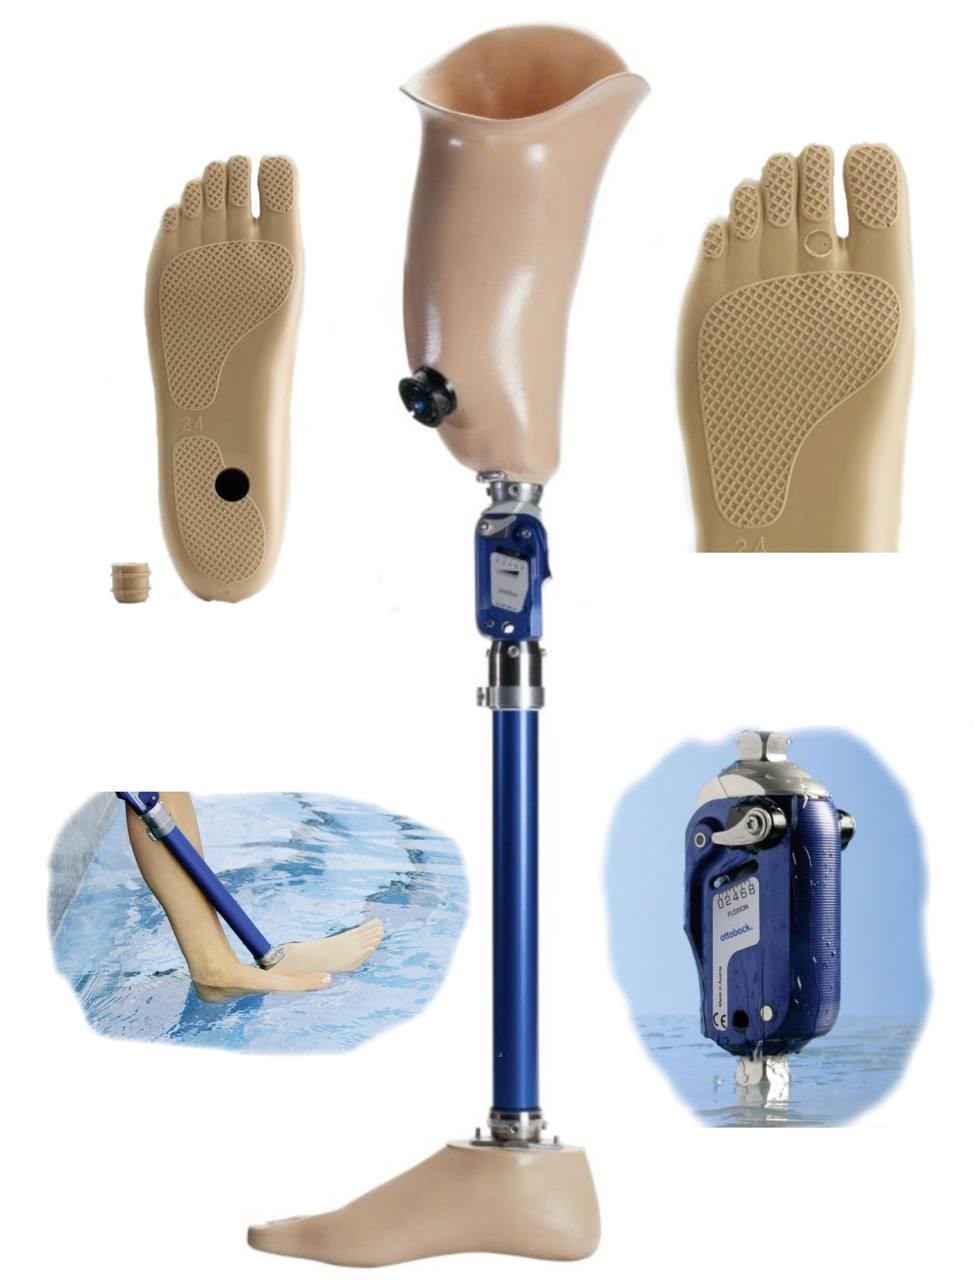 Waterproof prosthesis for knees and feet available from the Ottobock company. 